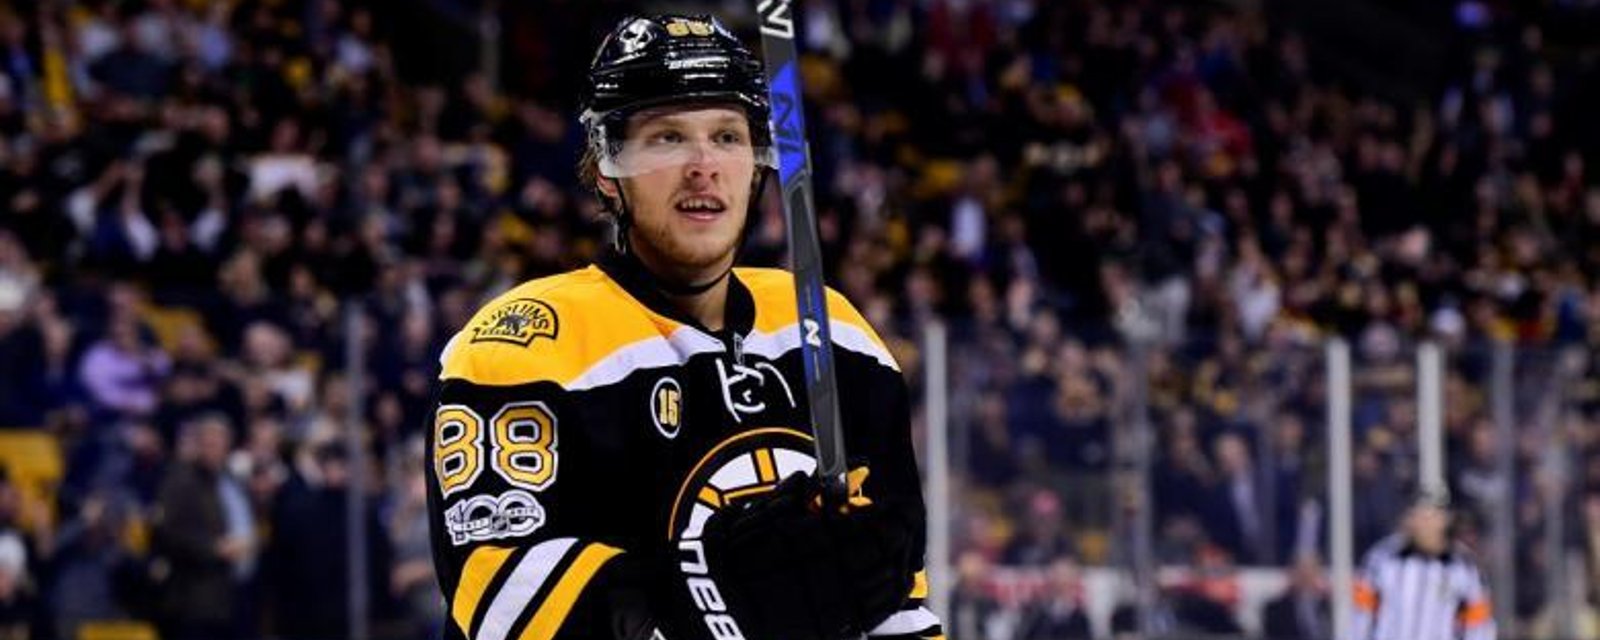 Watch all of Pastrnak's goals from last season